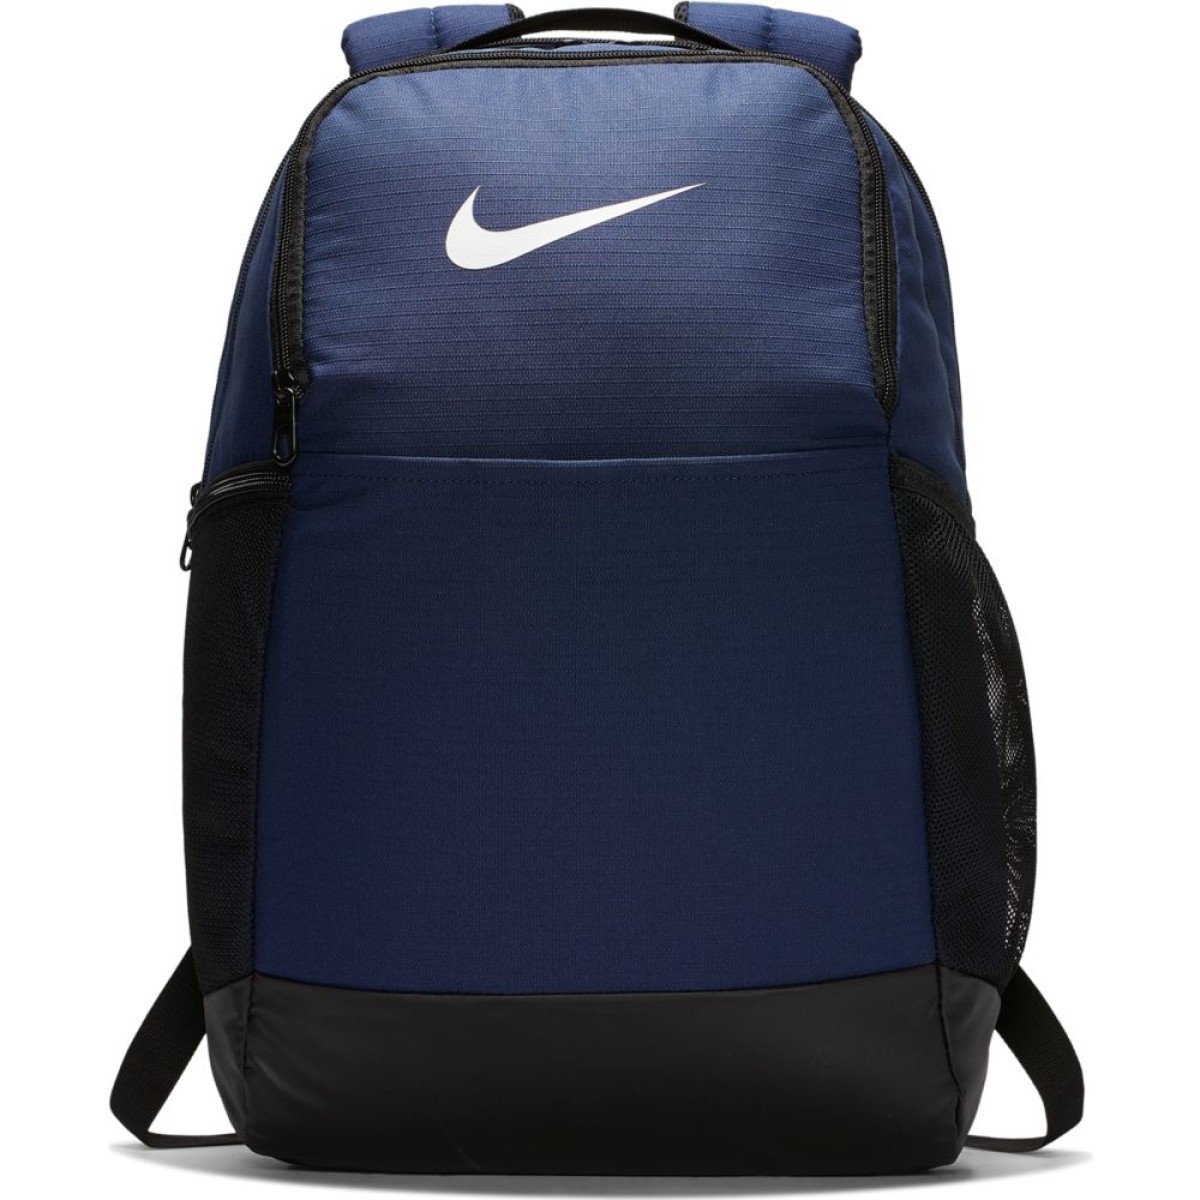 The medium-sized Nike Brasilia Backpack is ideal for packing everything